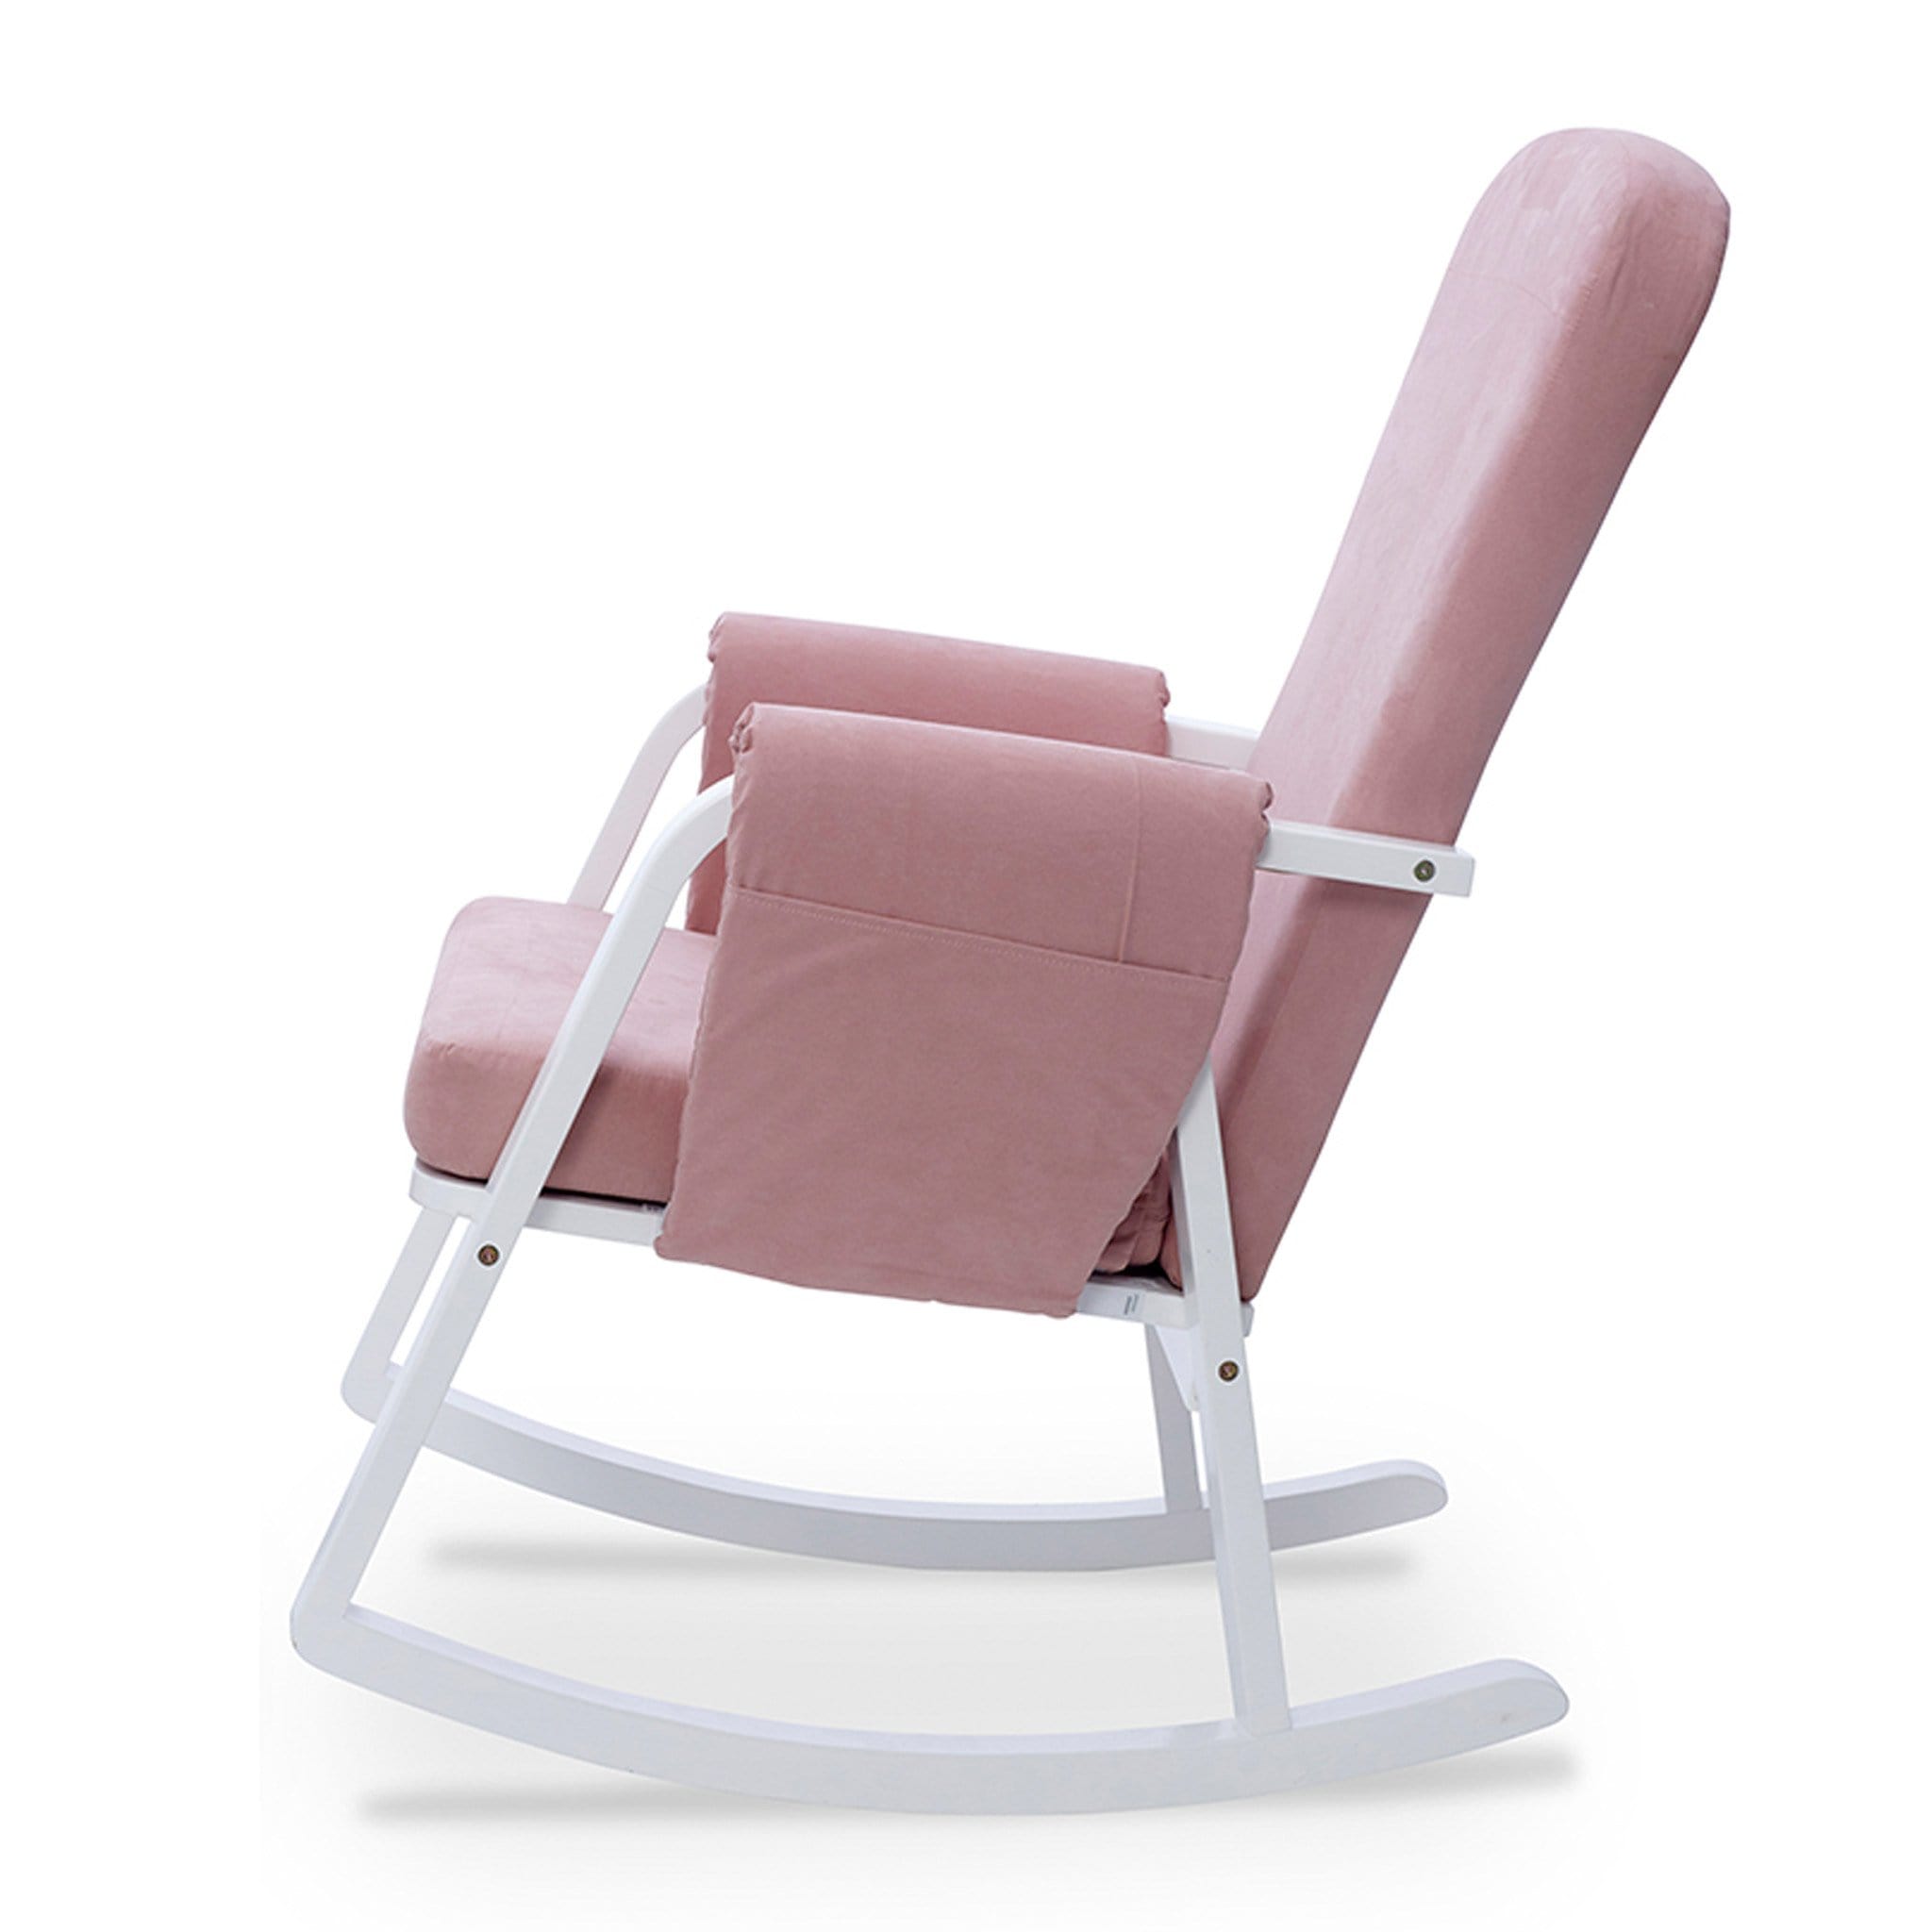 Ickle Bubba nursing chairs Ickle Bubba Dursley Rocking Chair Blush Pink 48-004-000-841